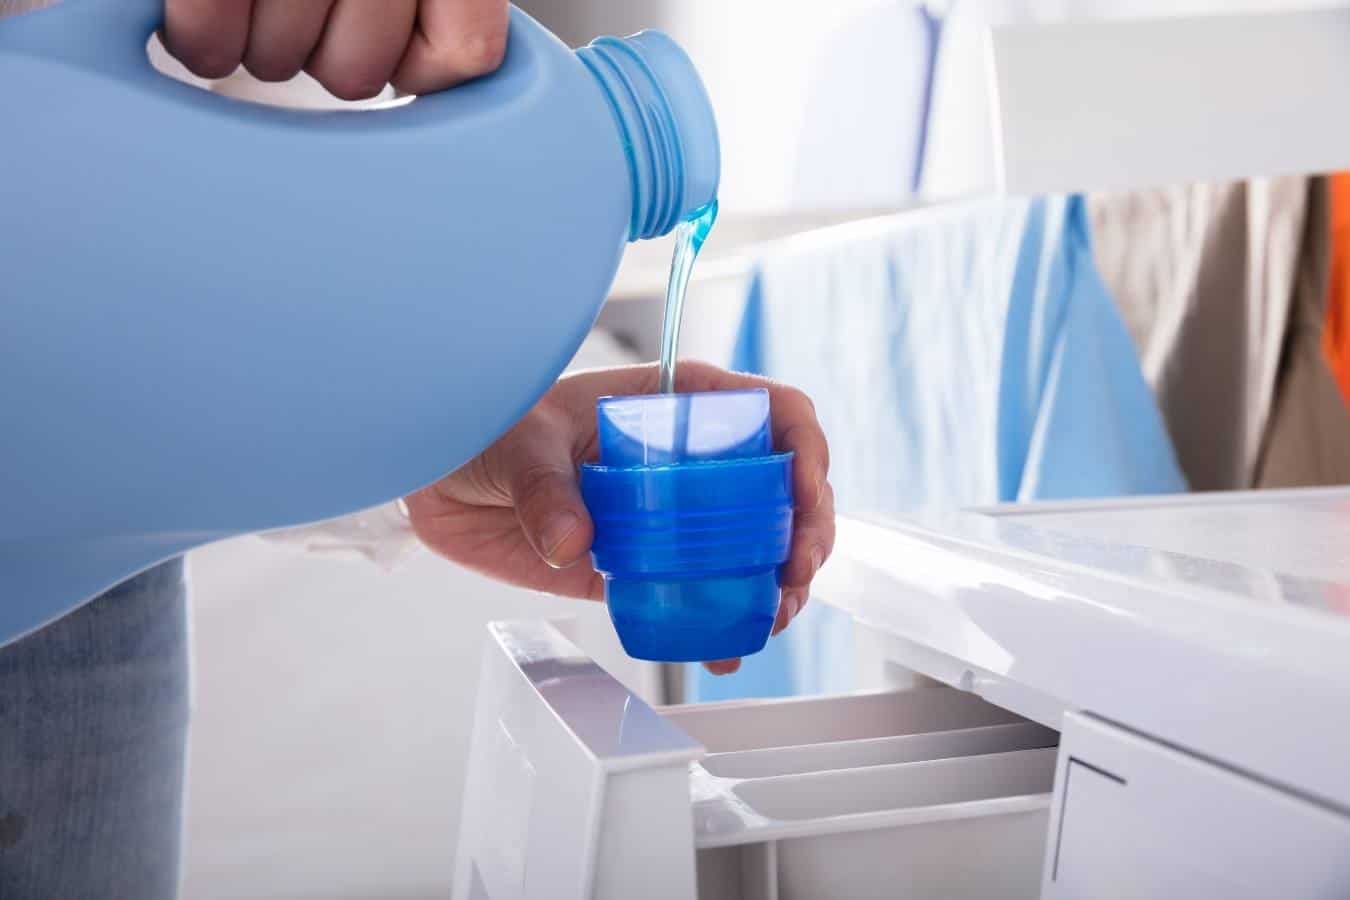 How To Remove Hair Dye With Laundry Detergent